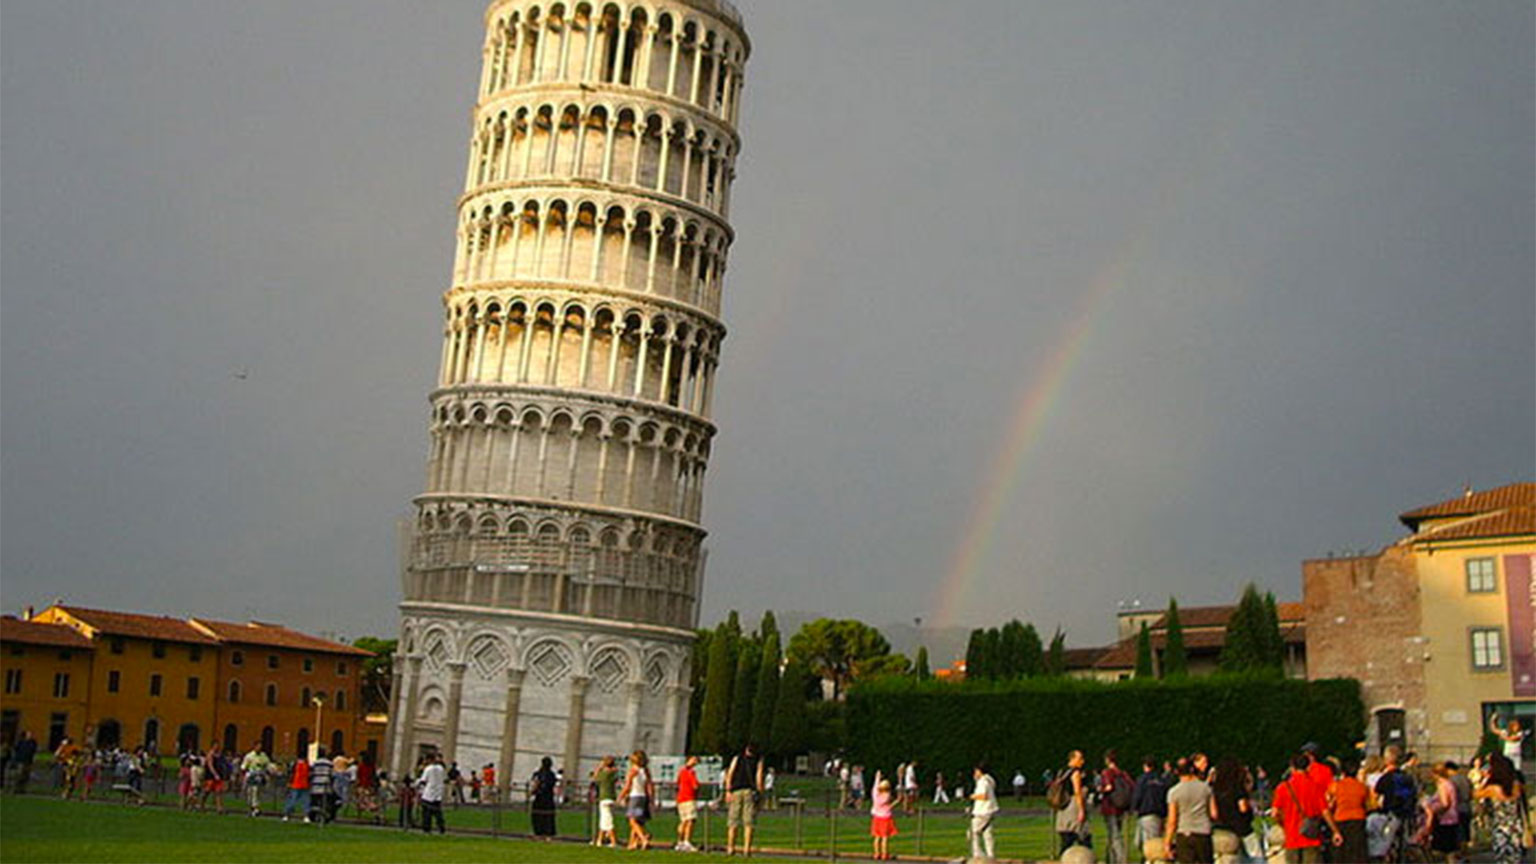 The leaning Tower of Pisa.